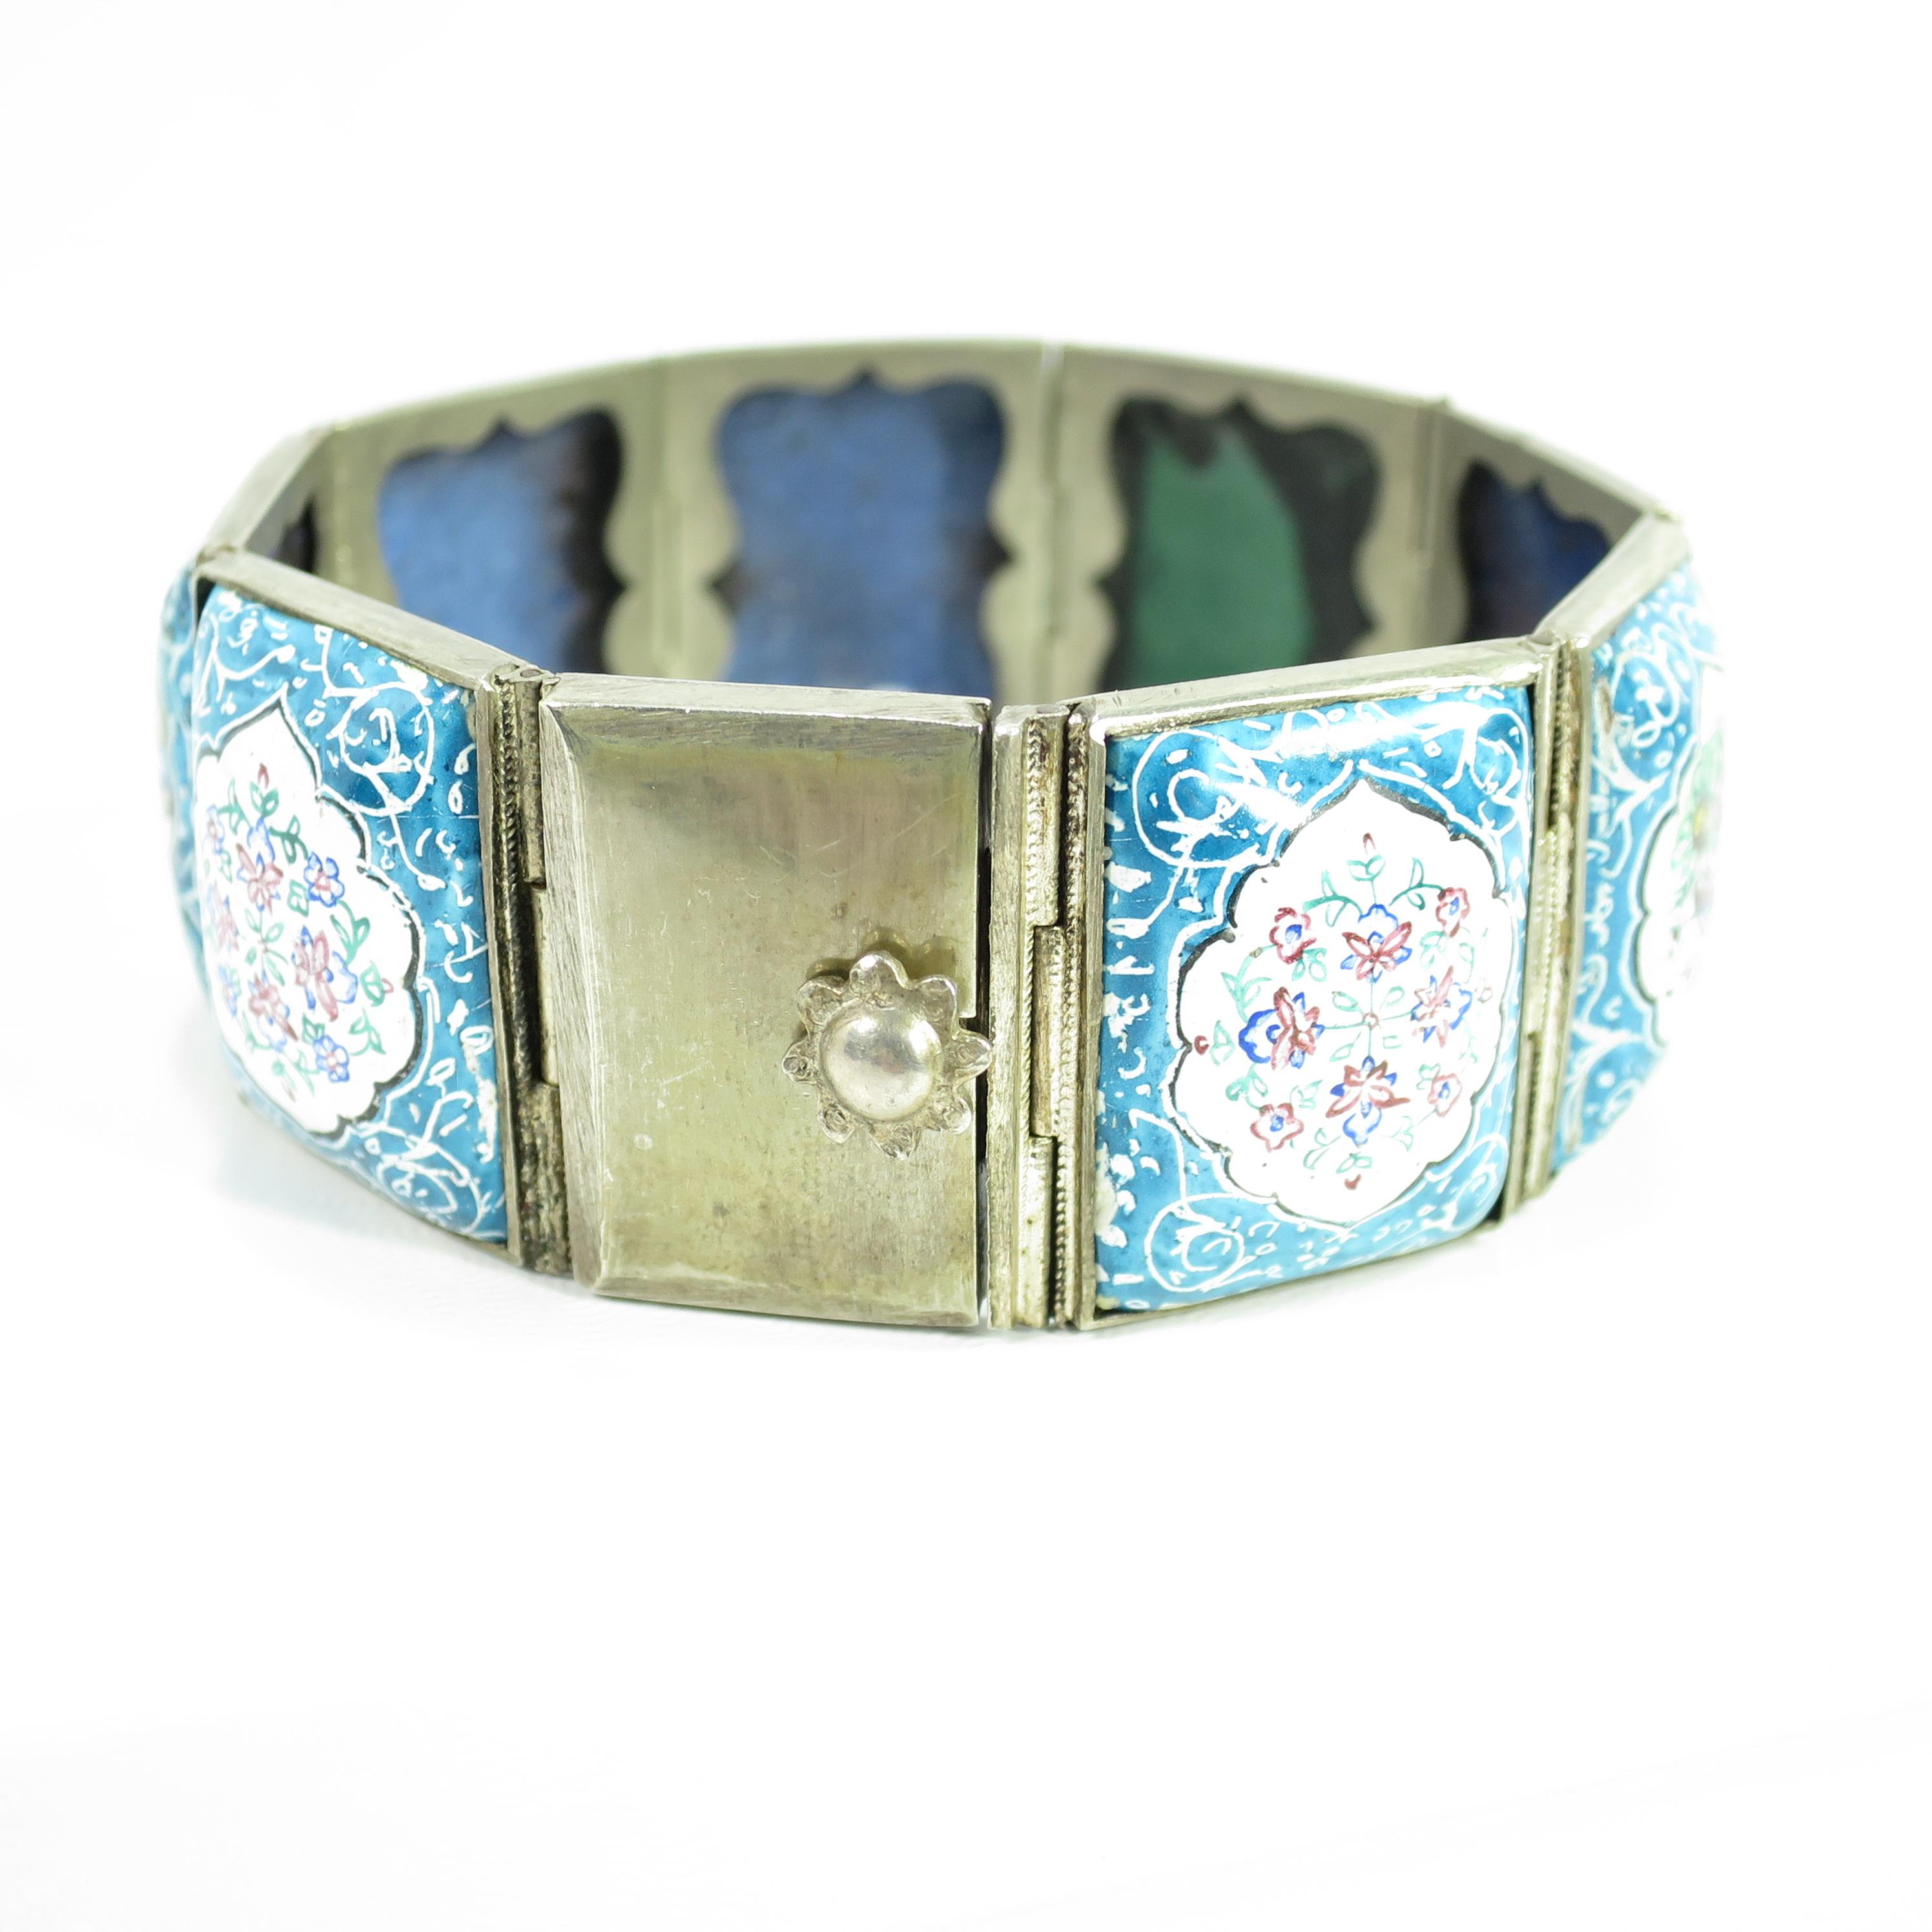 Persian Isfahan Silver Enamel Articulated Panel Bracelet, Artist-Signed 1930s For Sale 5